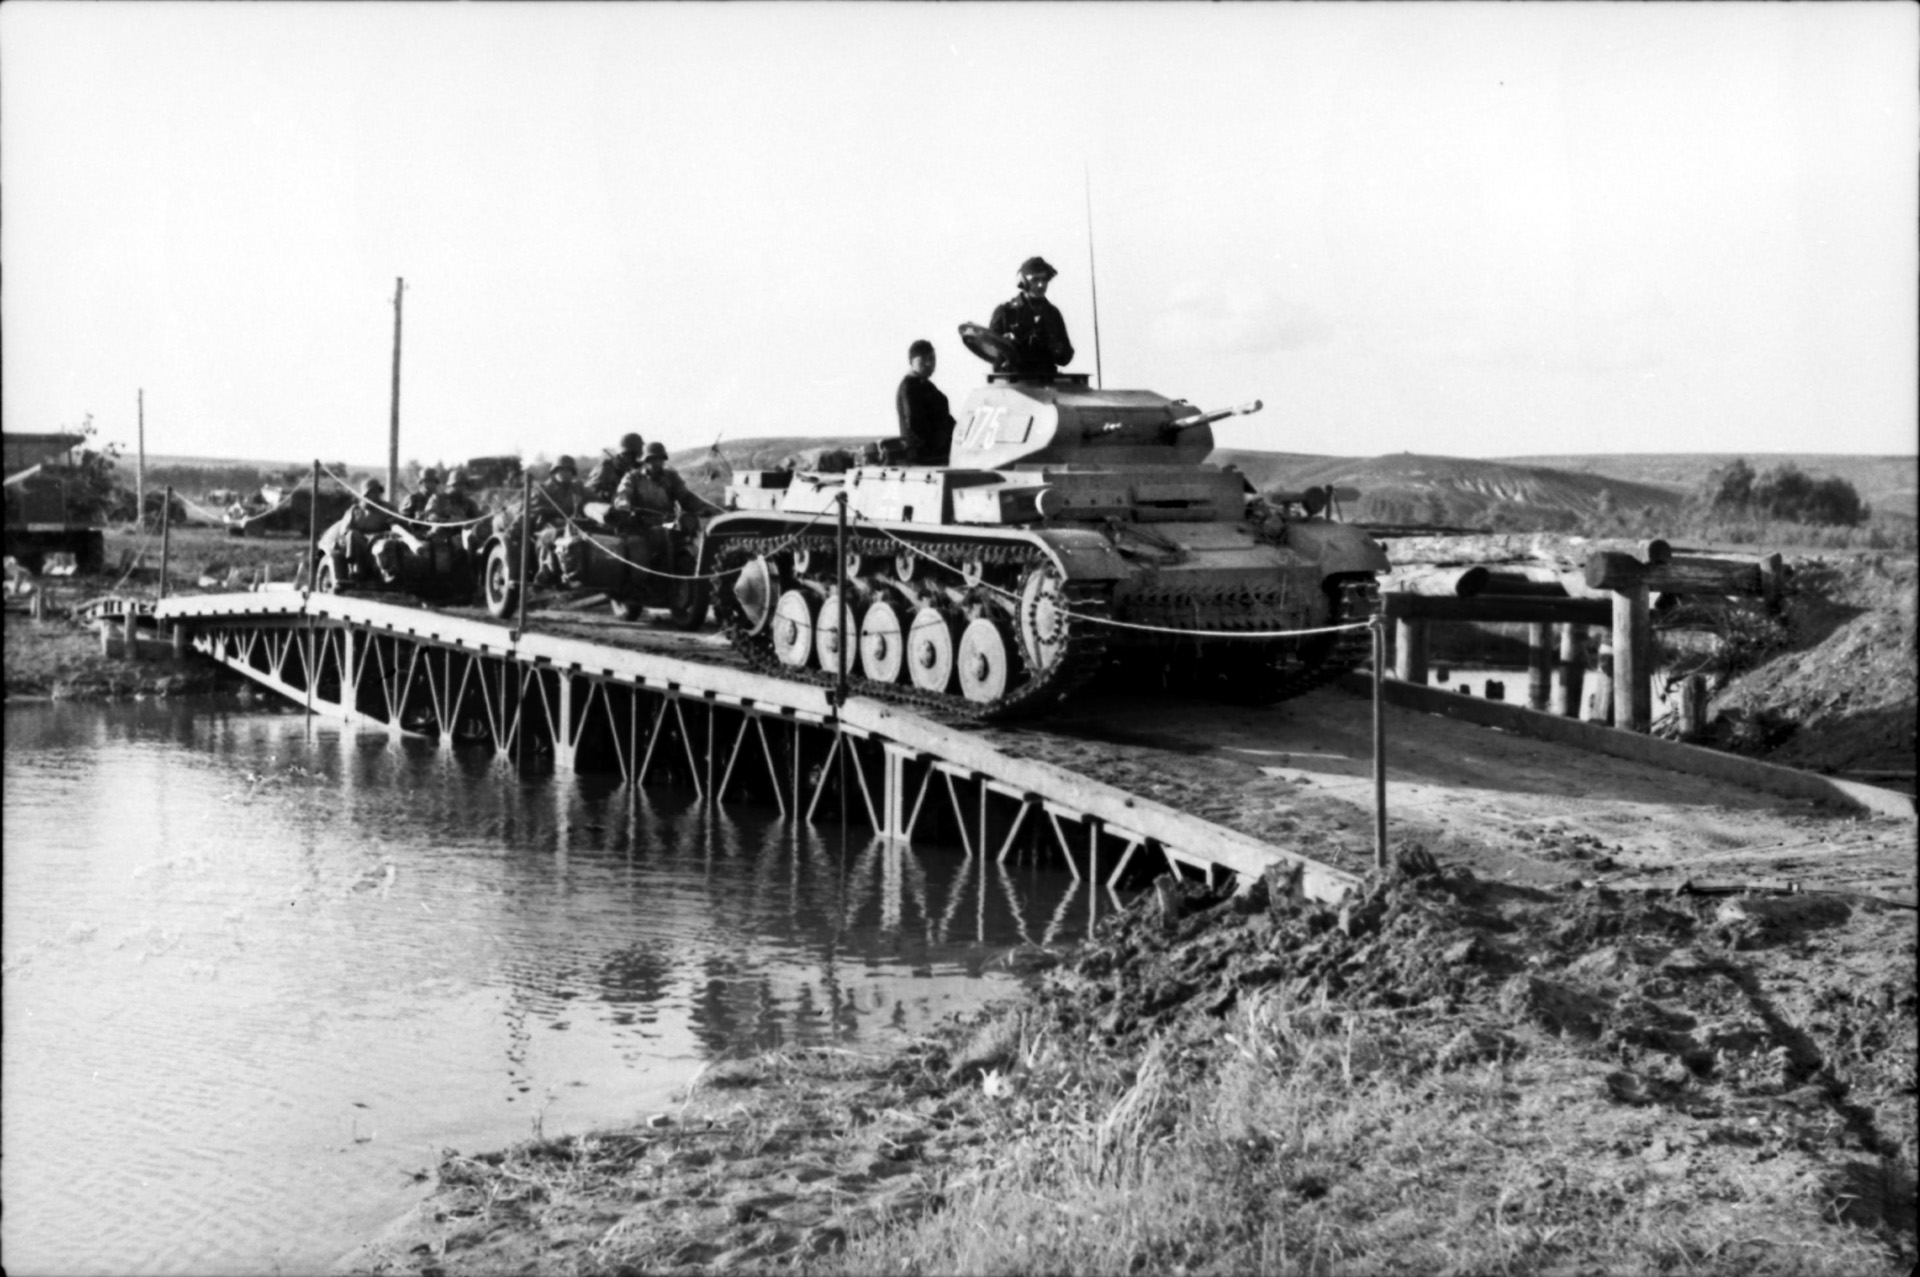 German troops, some riding motorcycles, advance across a makeshift bridge on the route to Voronezh during late June 1942. The tank seen in the photo is the lightly-armed PzKpfw. II, actually obsolete by the time Case Blue was launched.